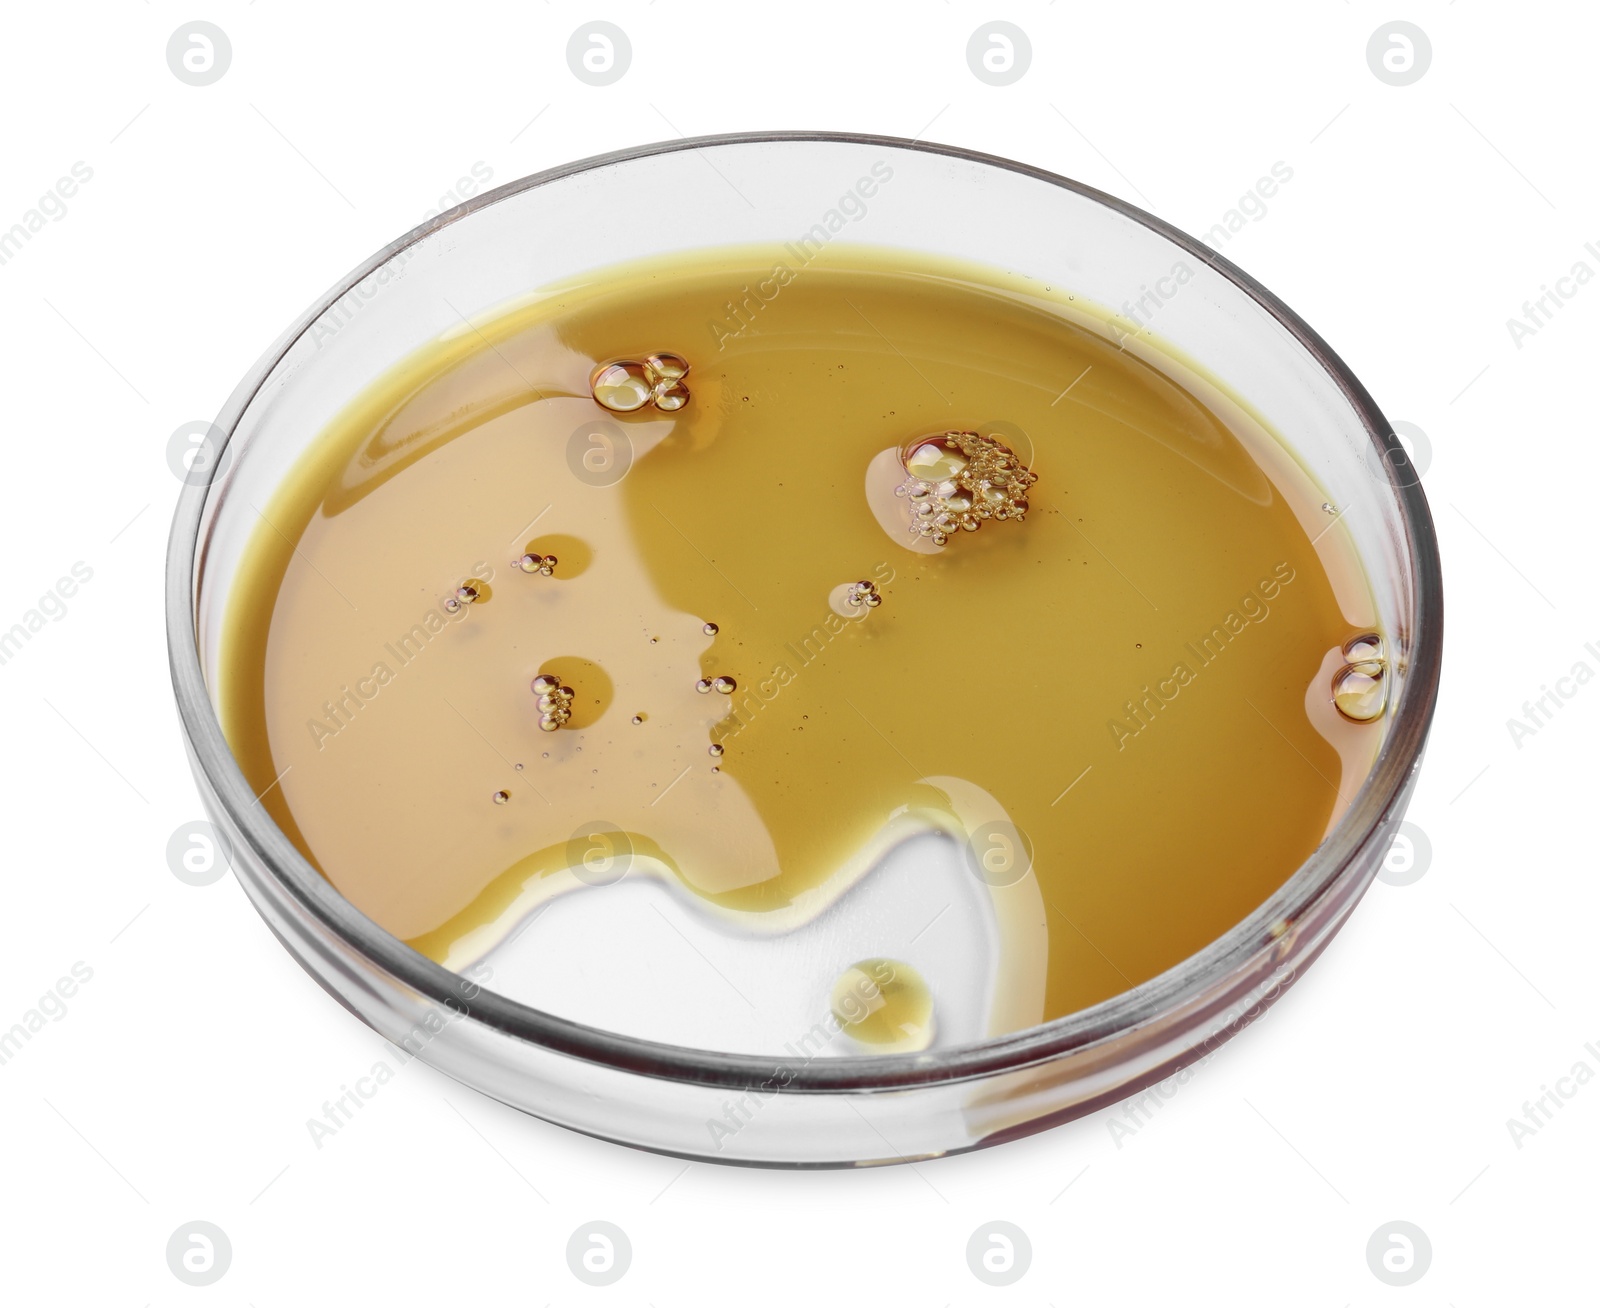 Photo of Petri dish with color liquid sample isolated on white